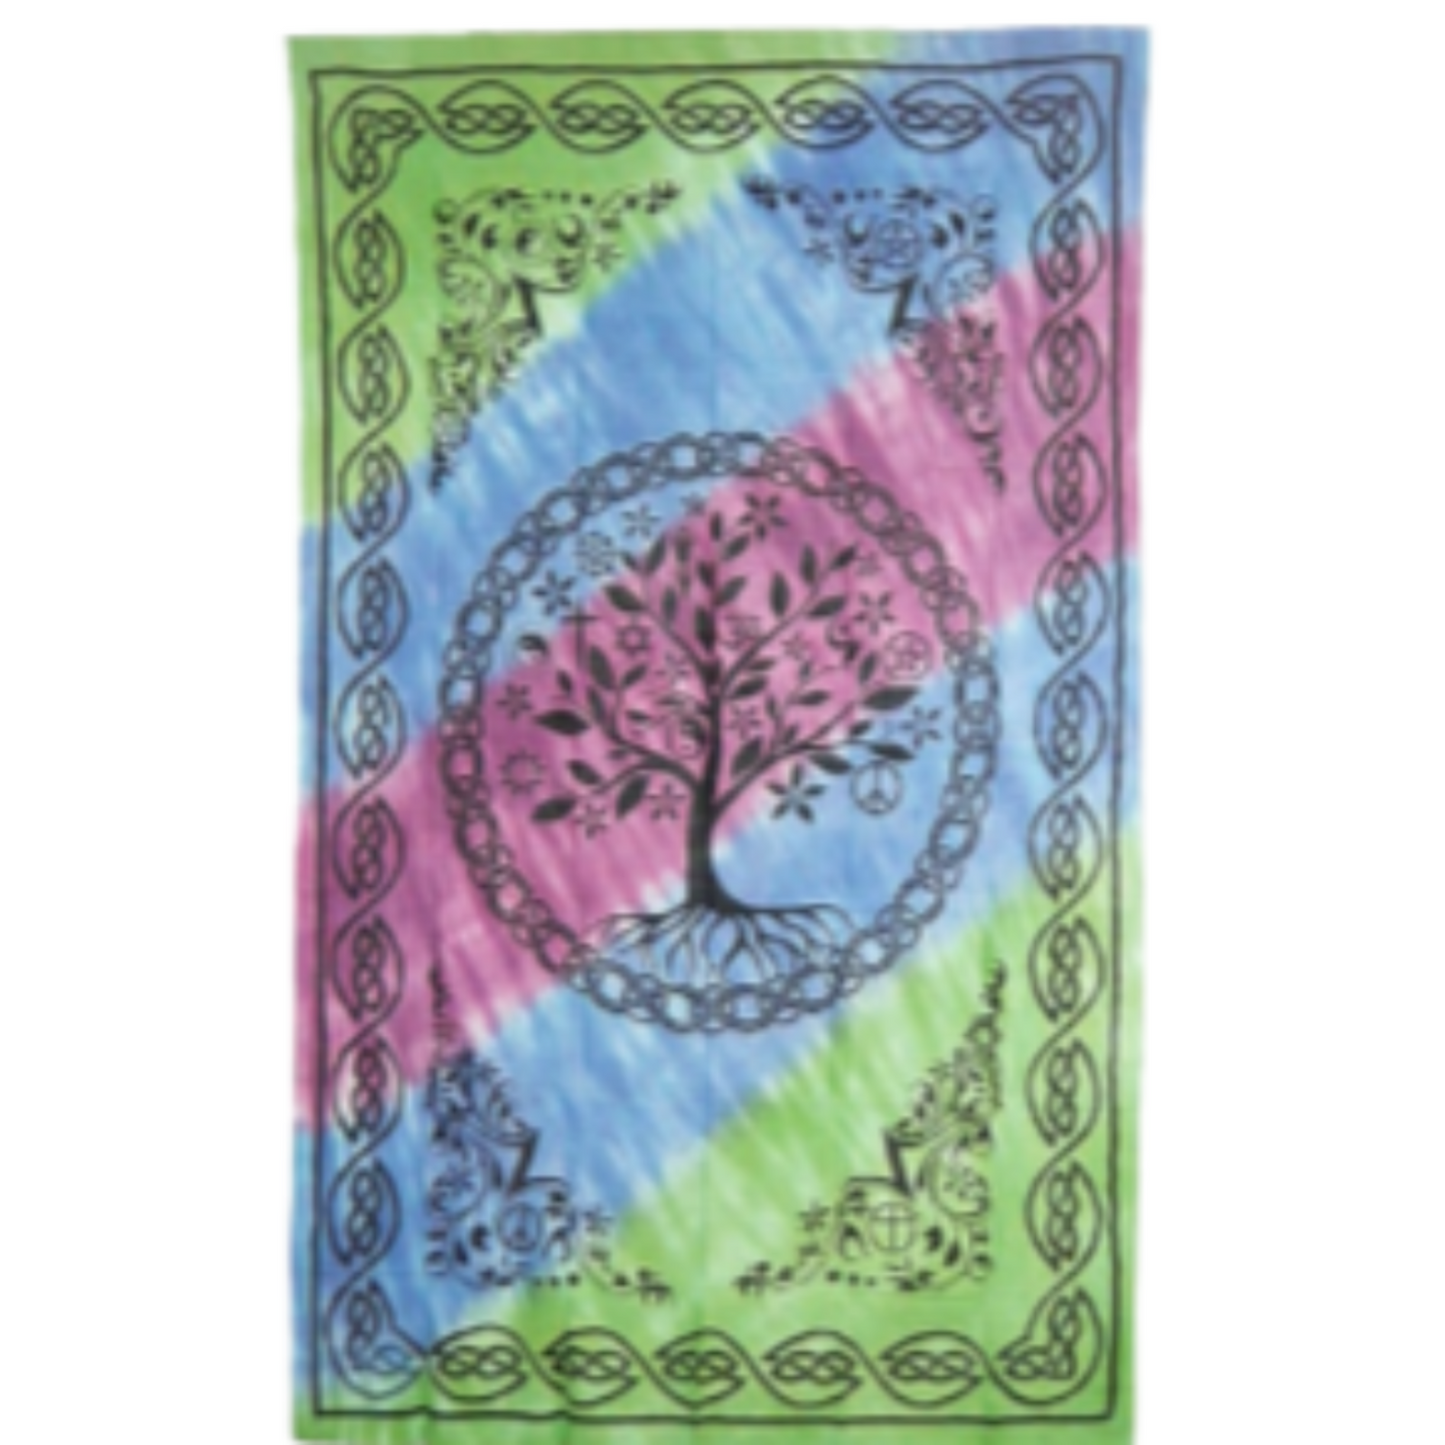 Bedspread Tapestry Tree of Life on tie dye 72x108 inches